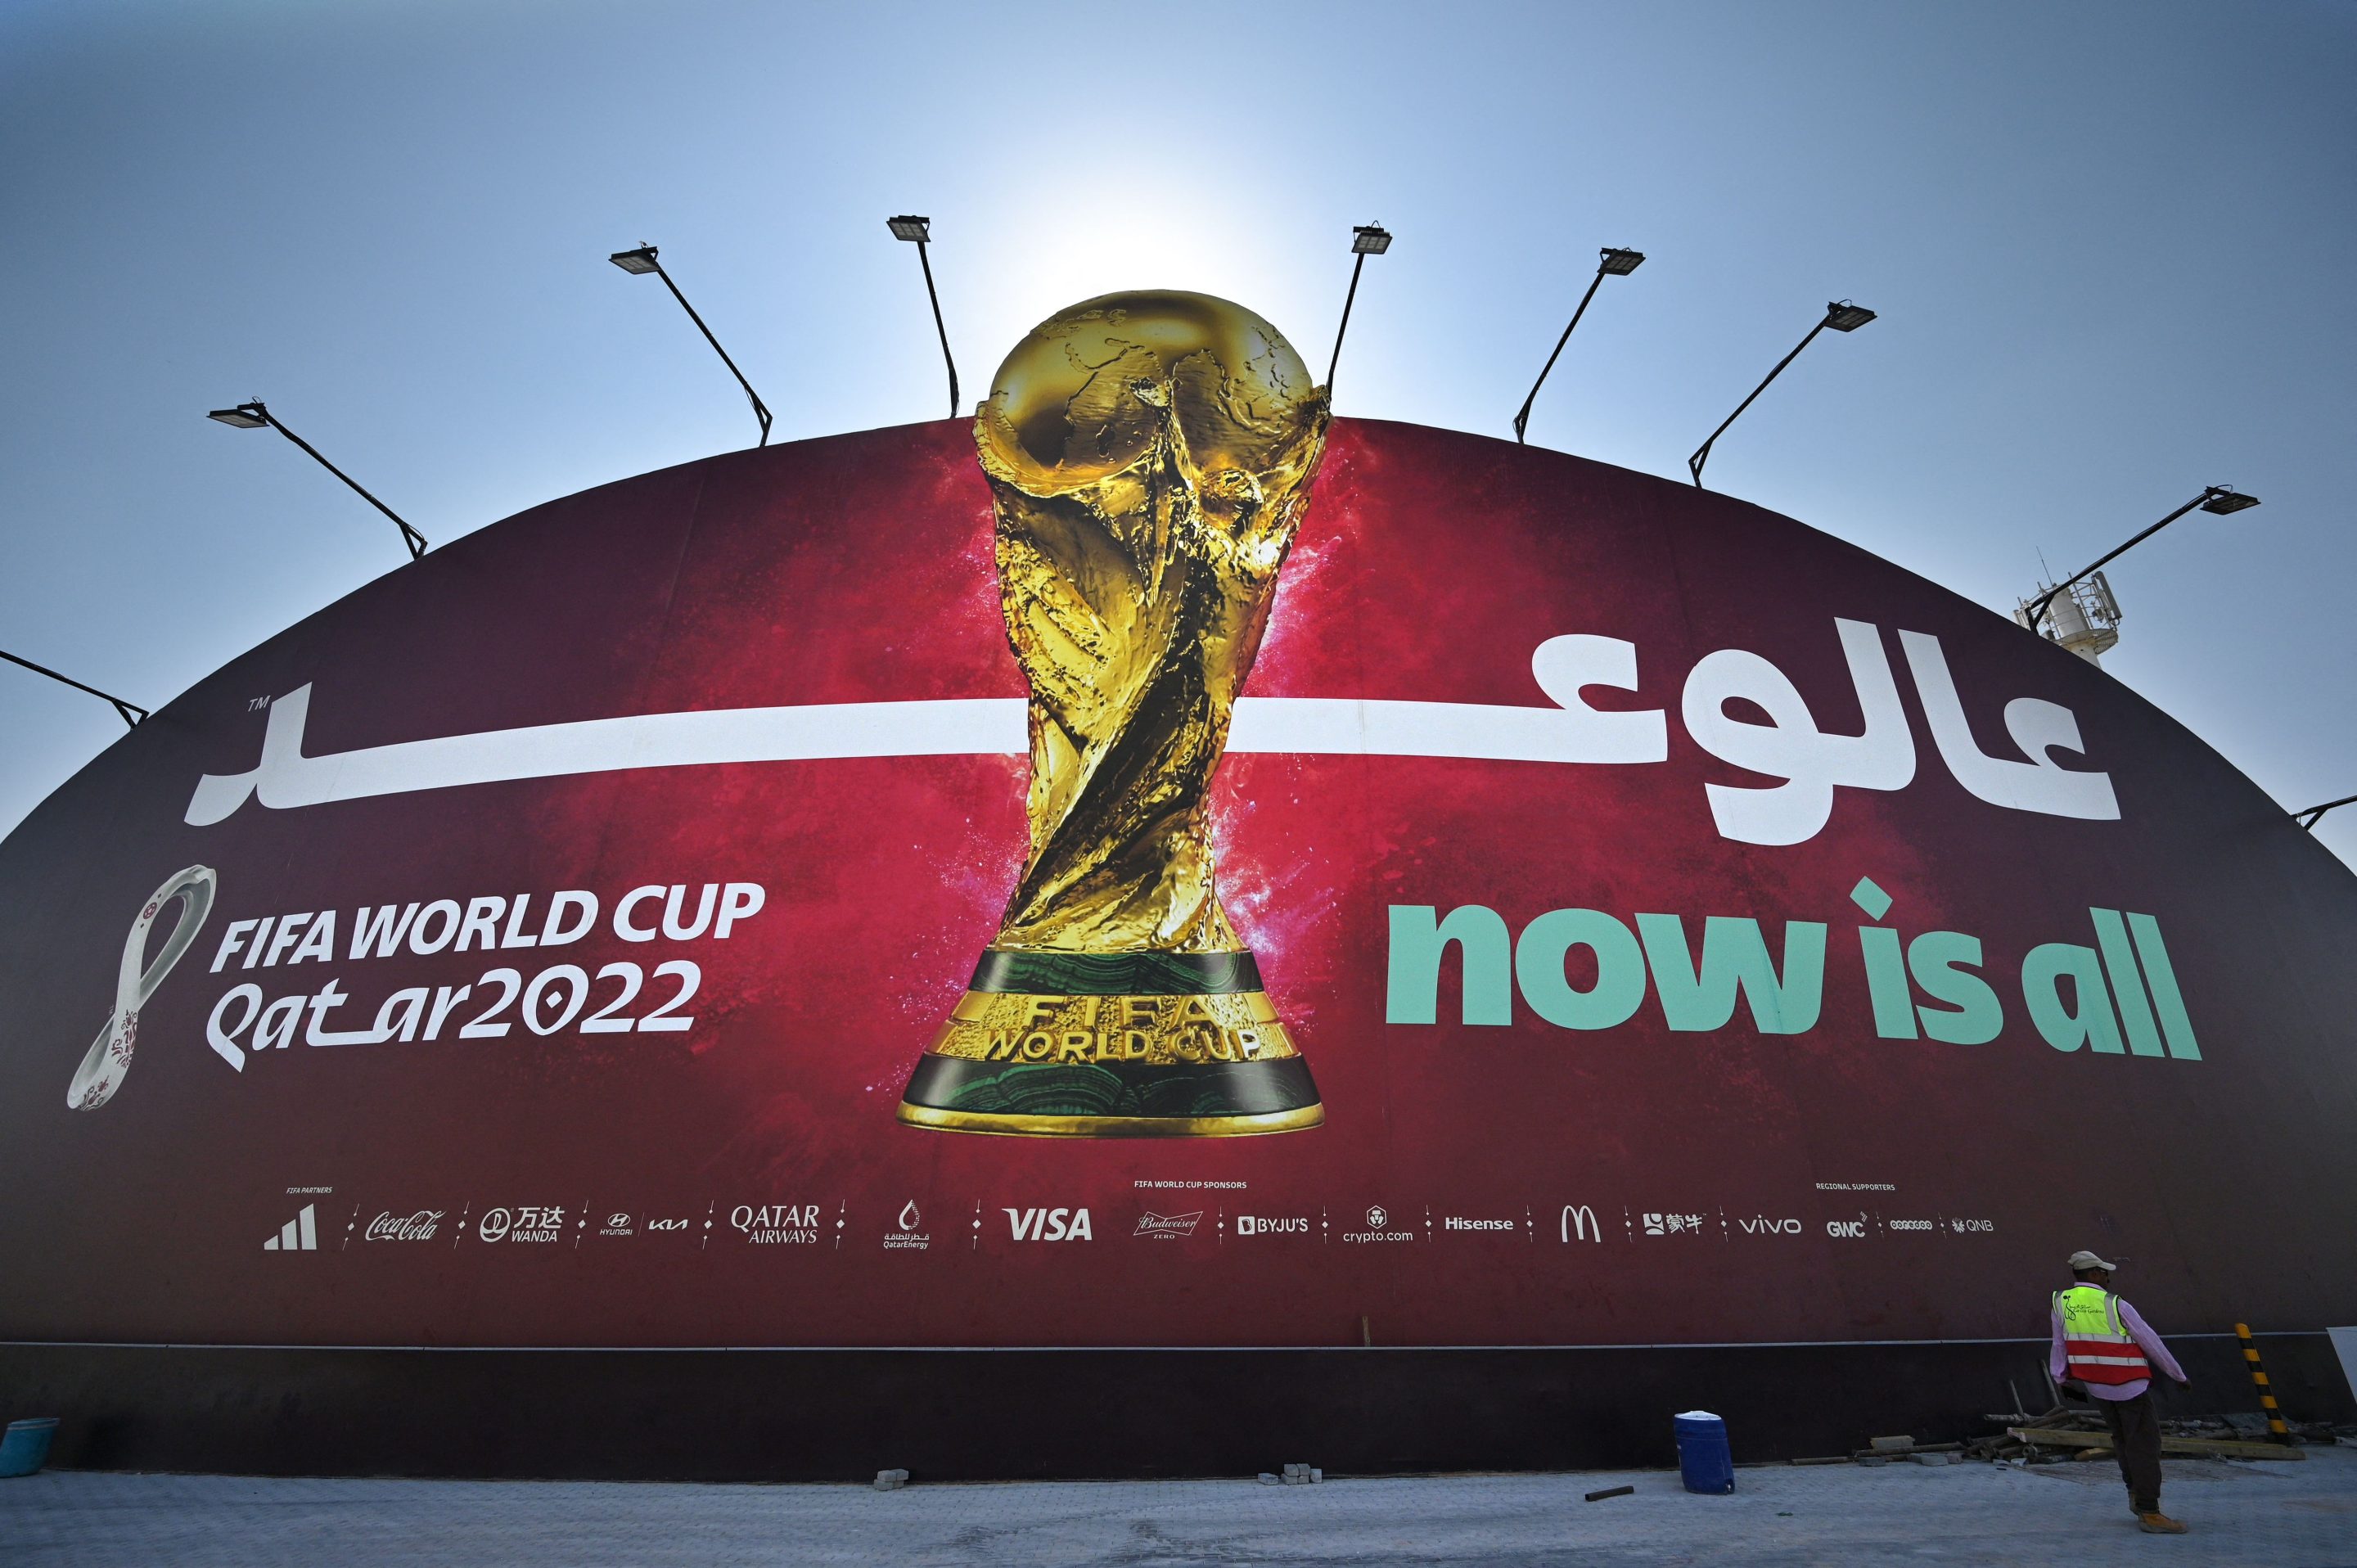 The World Cup comes with a global price tag